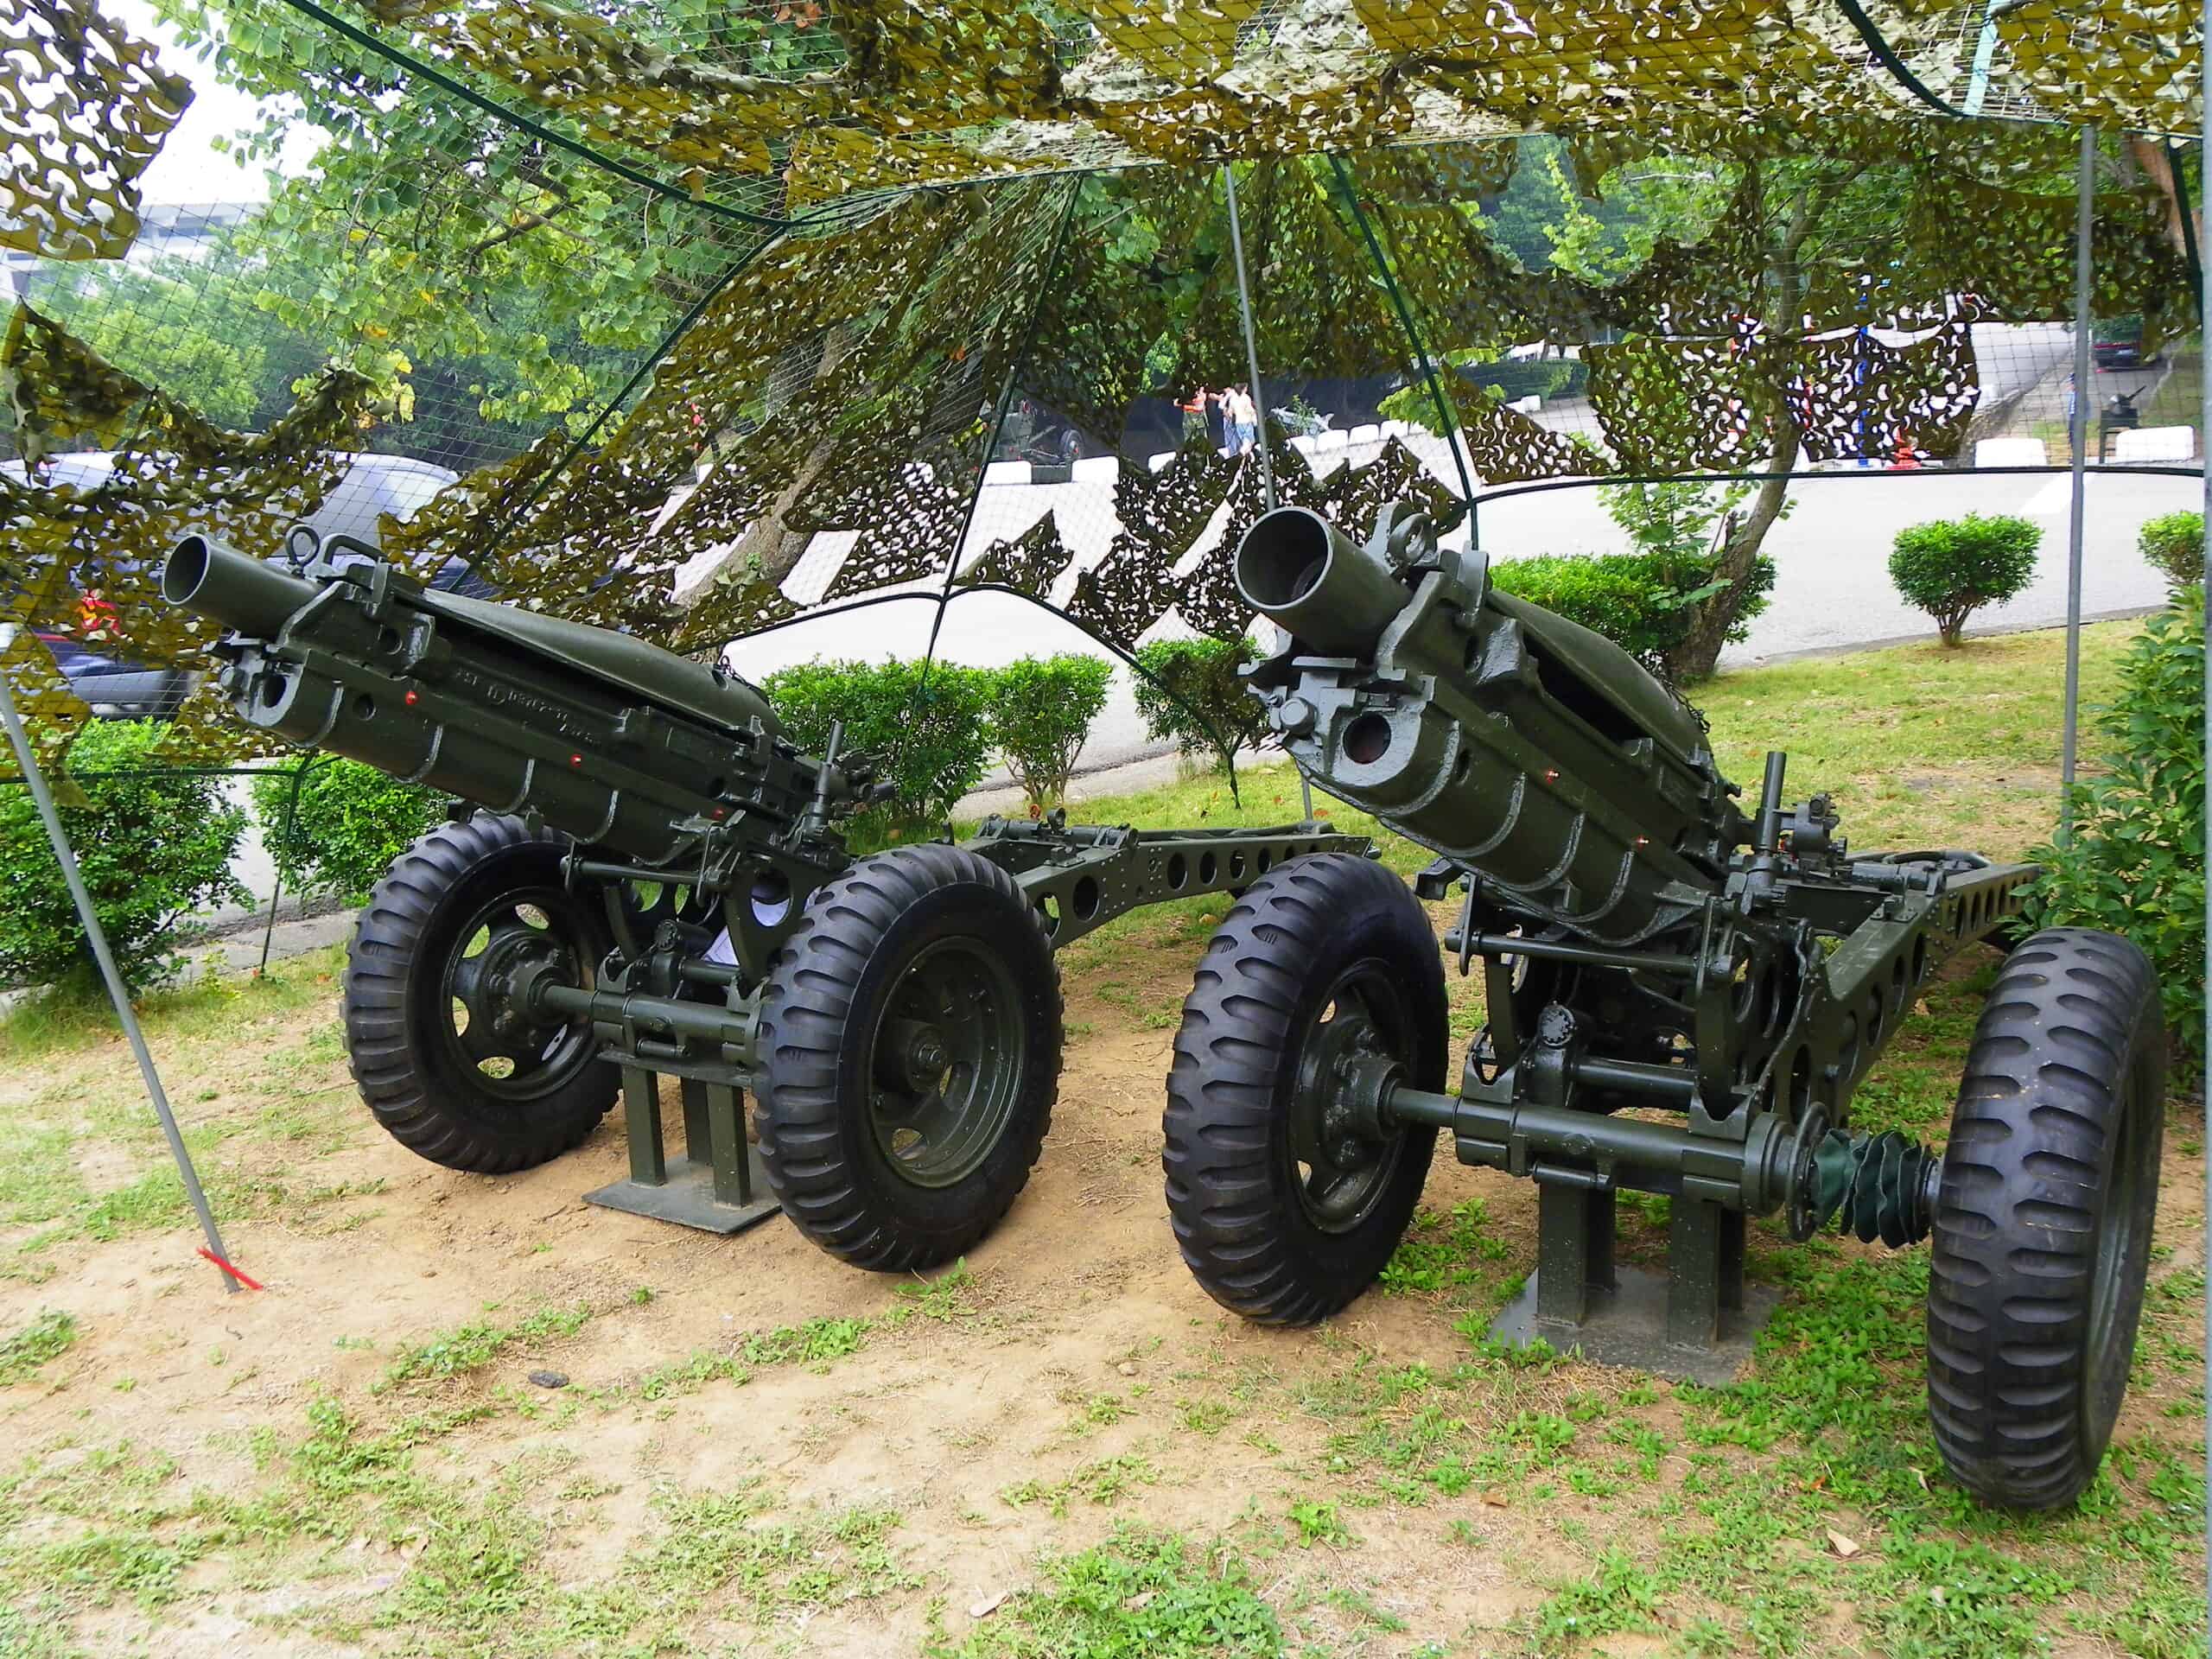 Two M116 75mm Howitzers in Chengkungling by u7384u53f2u751f